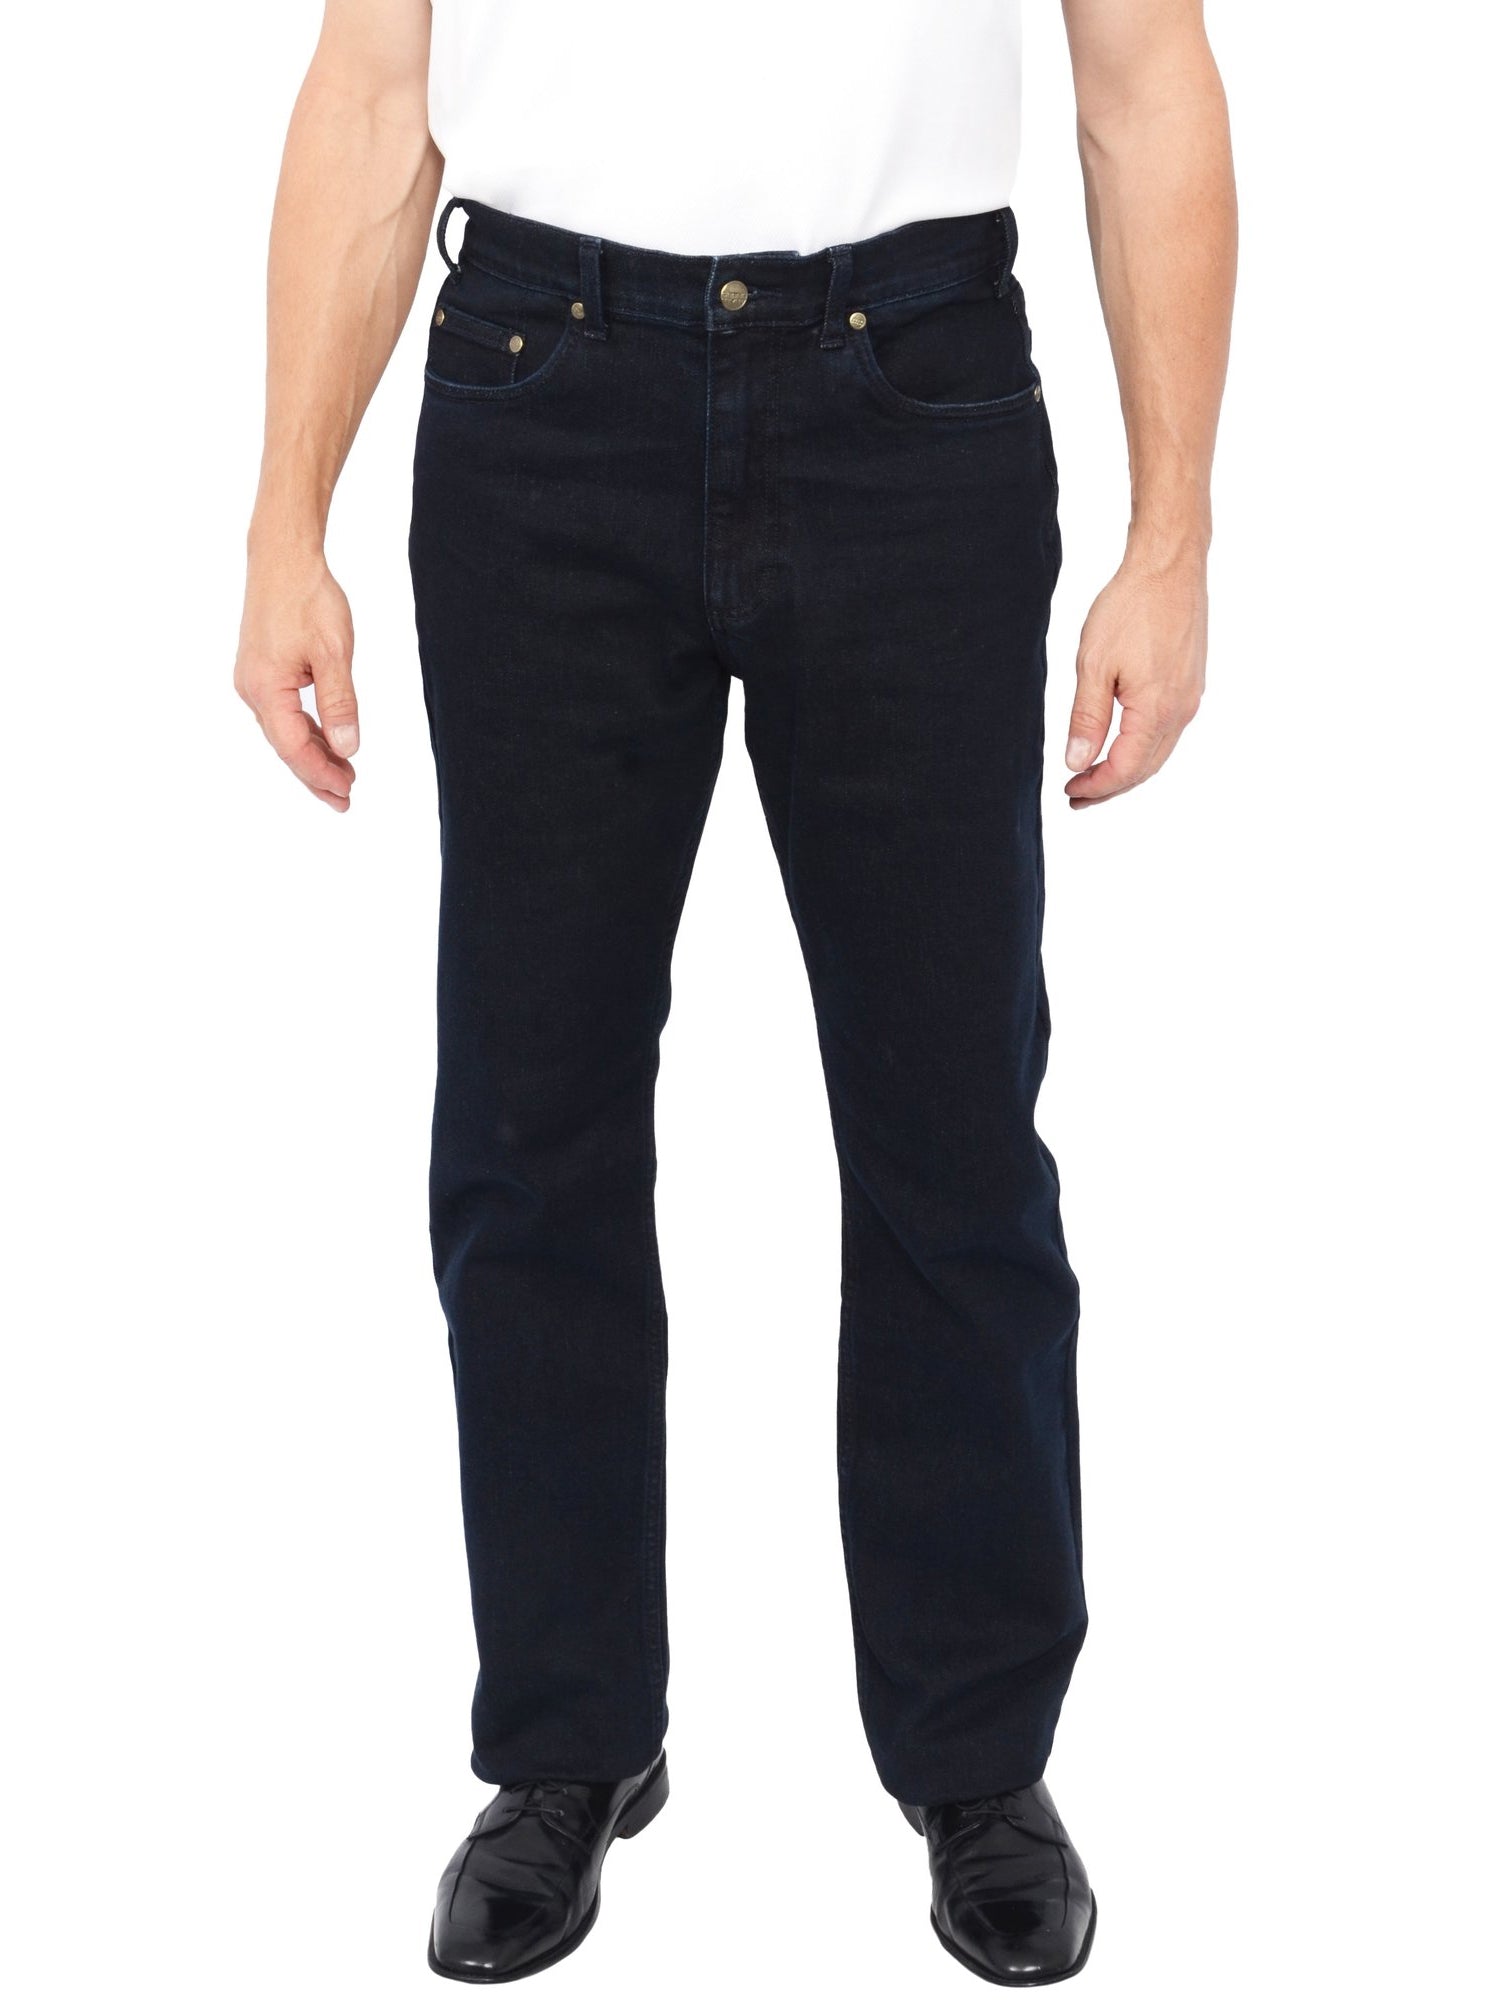 Grand River Stretch Traditional Fit Men's Jeans in Midnight - Big Man Sizes